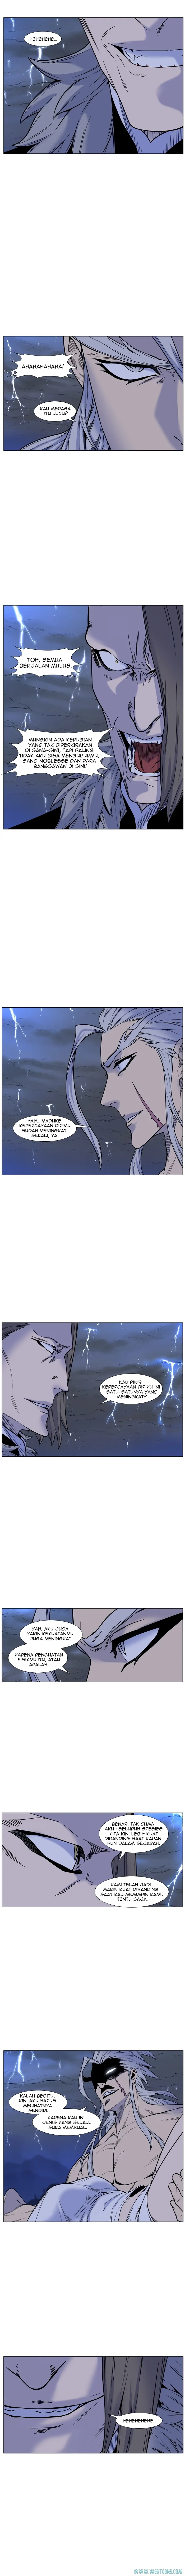 Noblesse Chapter 447 - 67